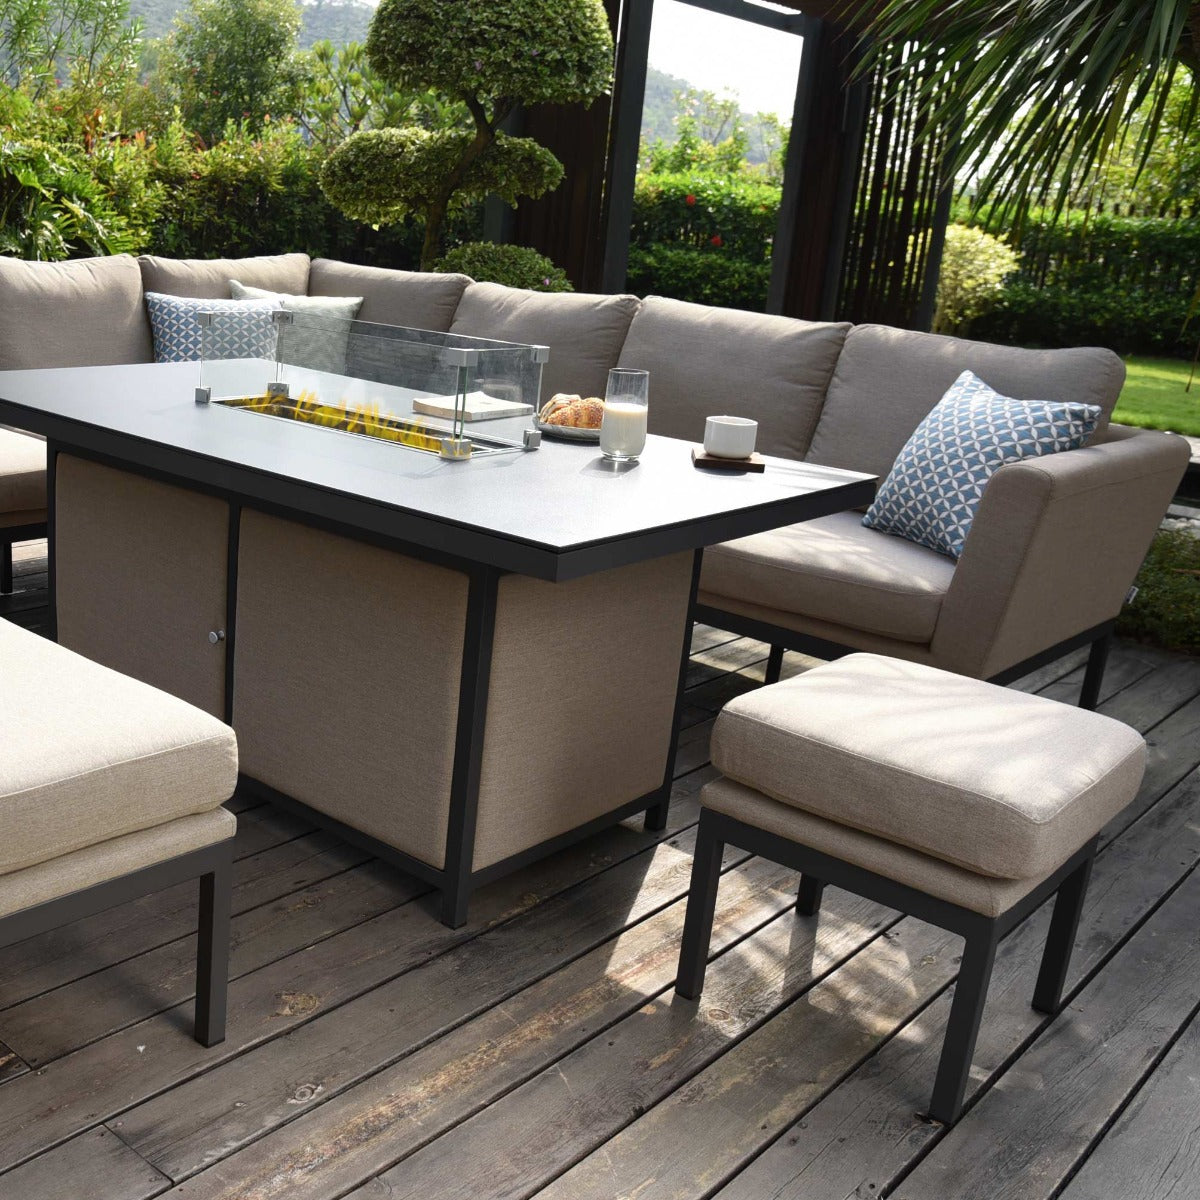 Maze - Outdoor Fabric Pulse Rectangular Corner Dining Set with Fire Pit Table - Taupe